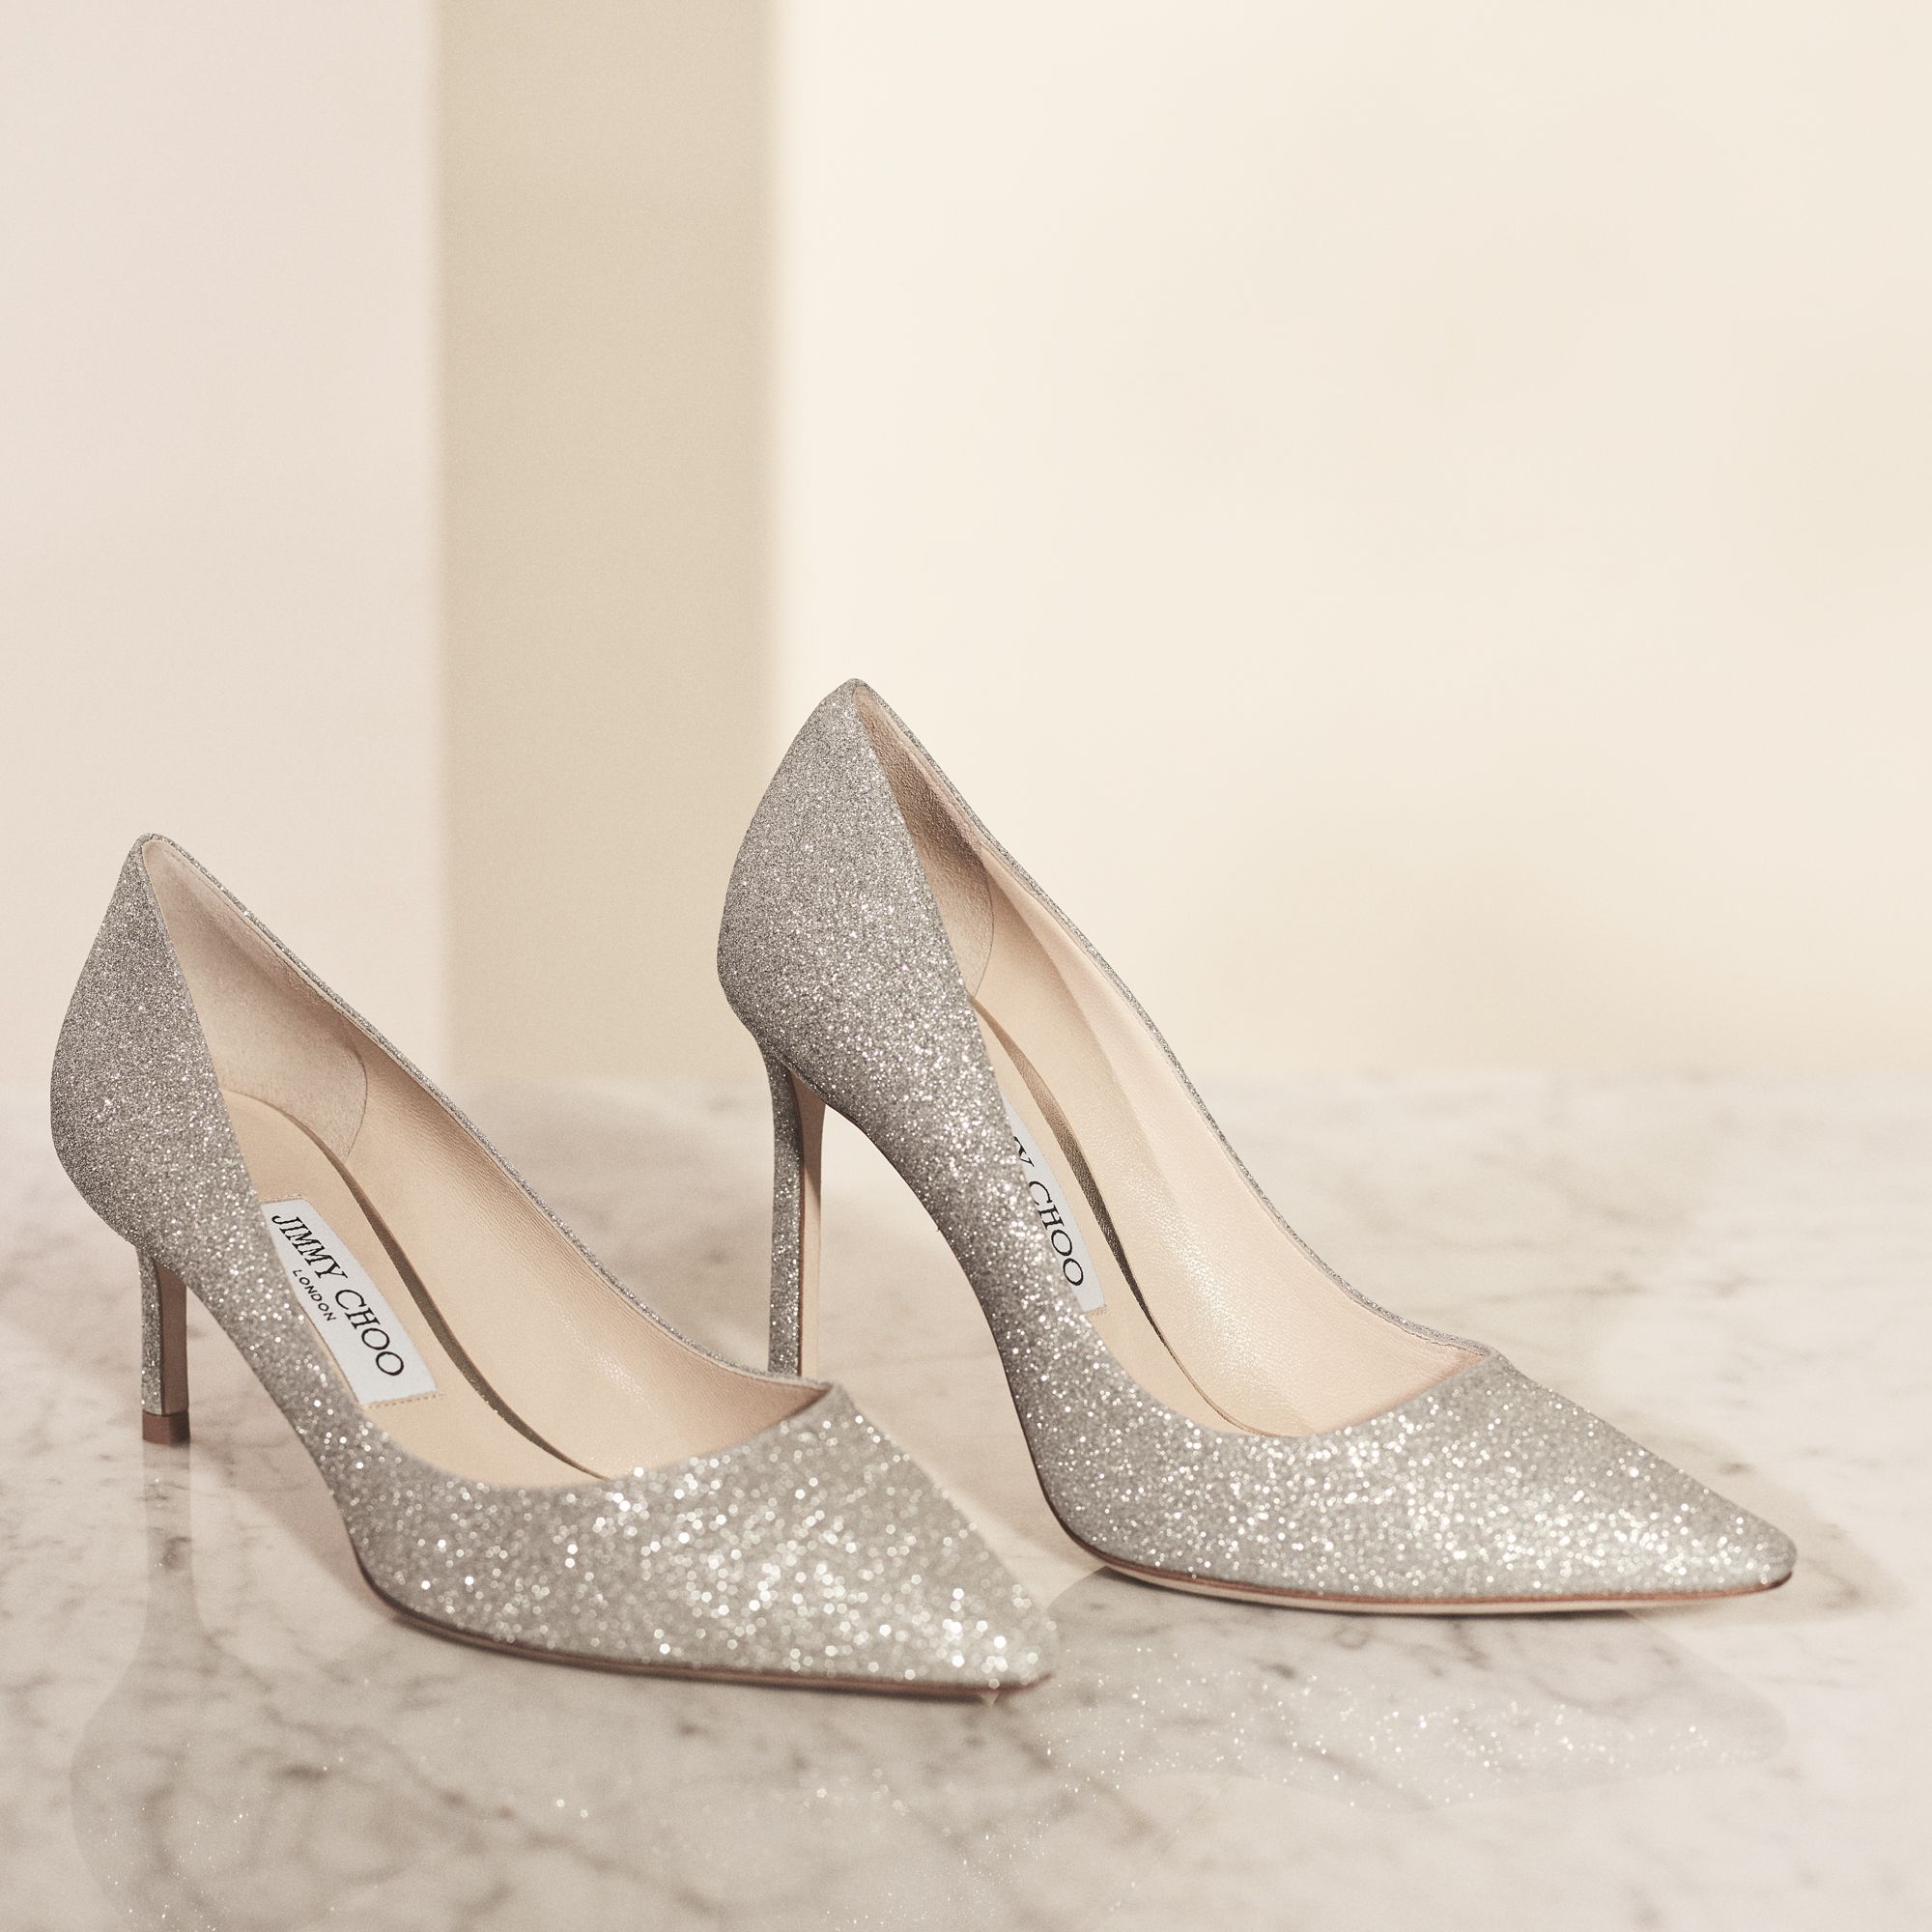 The best wedding shoes